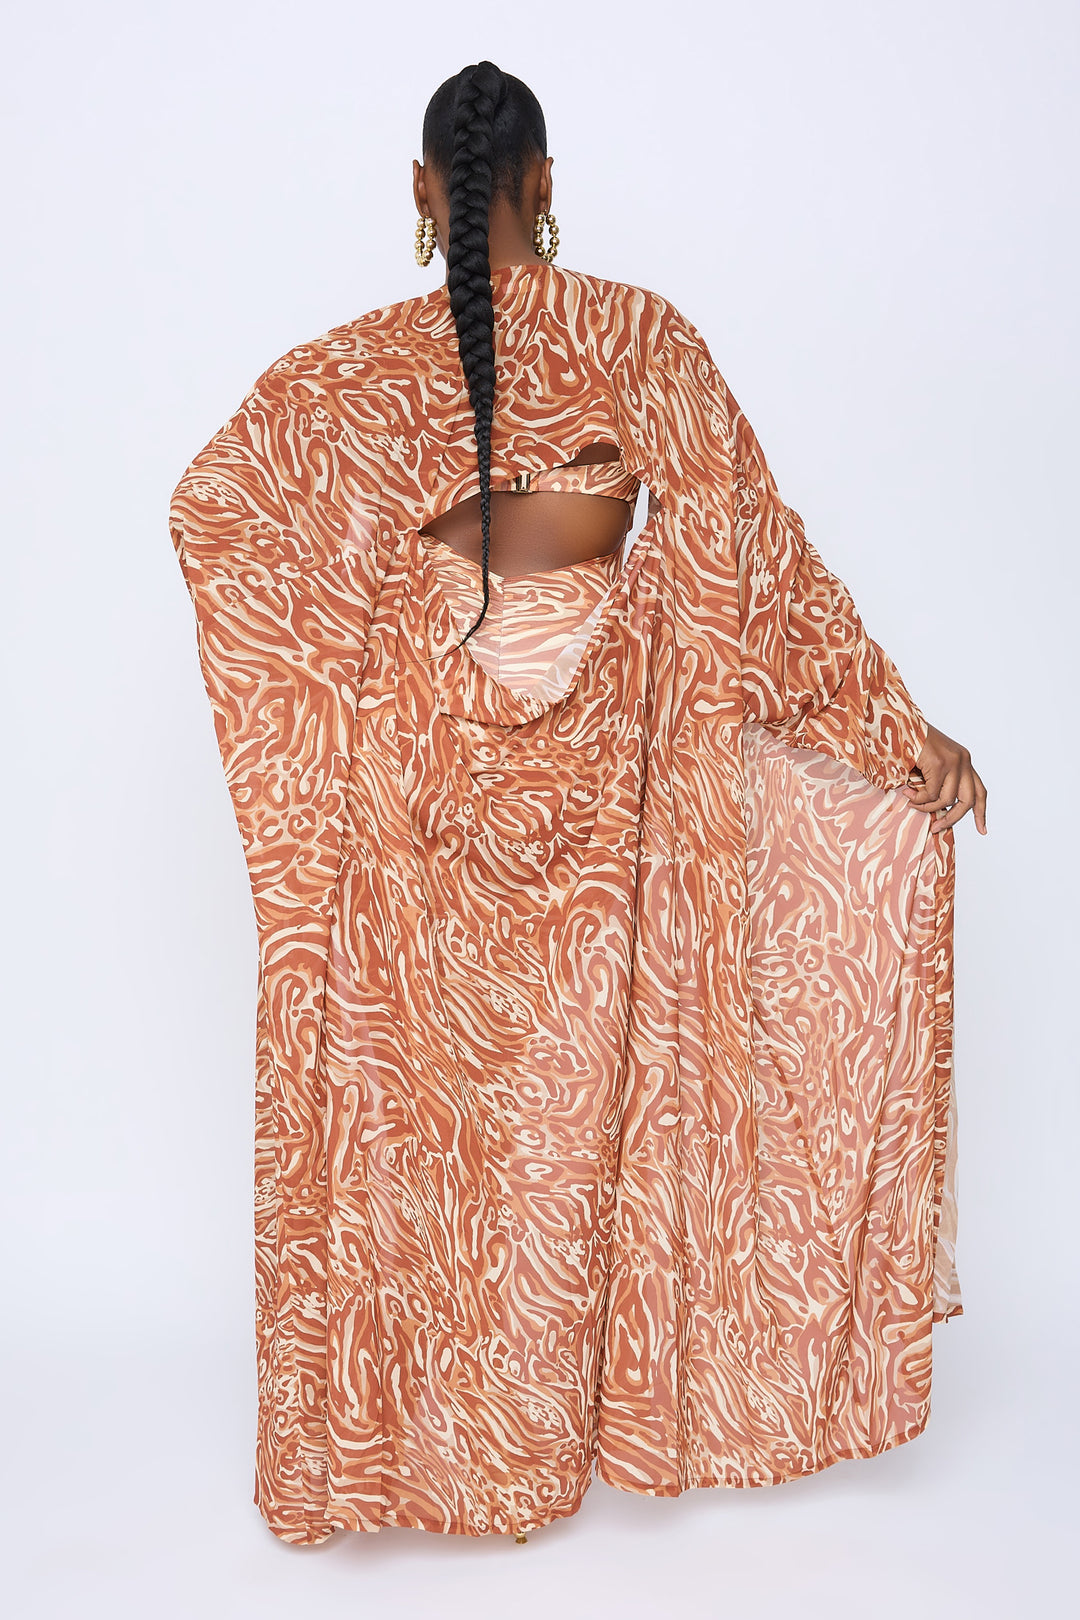 BREATHLESS MOMENTS COVERUP - BROWN PRINT